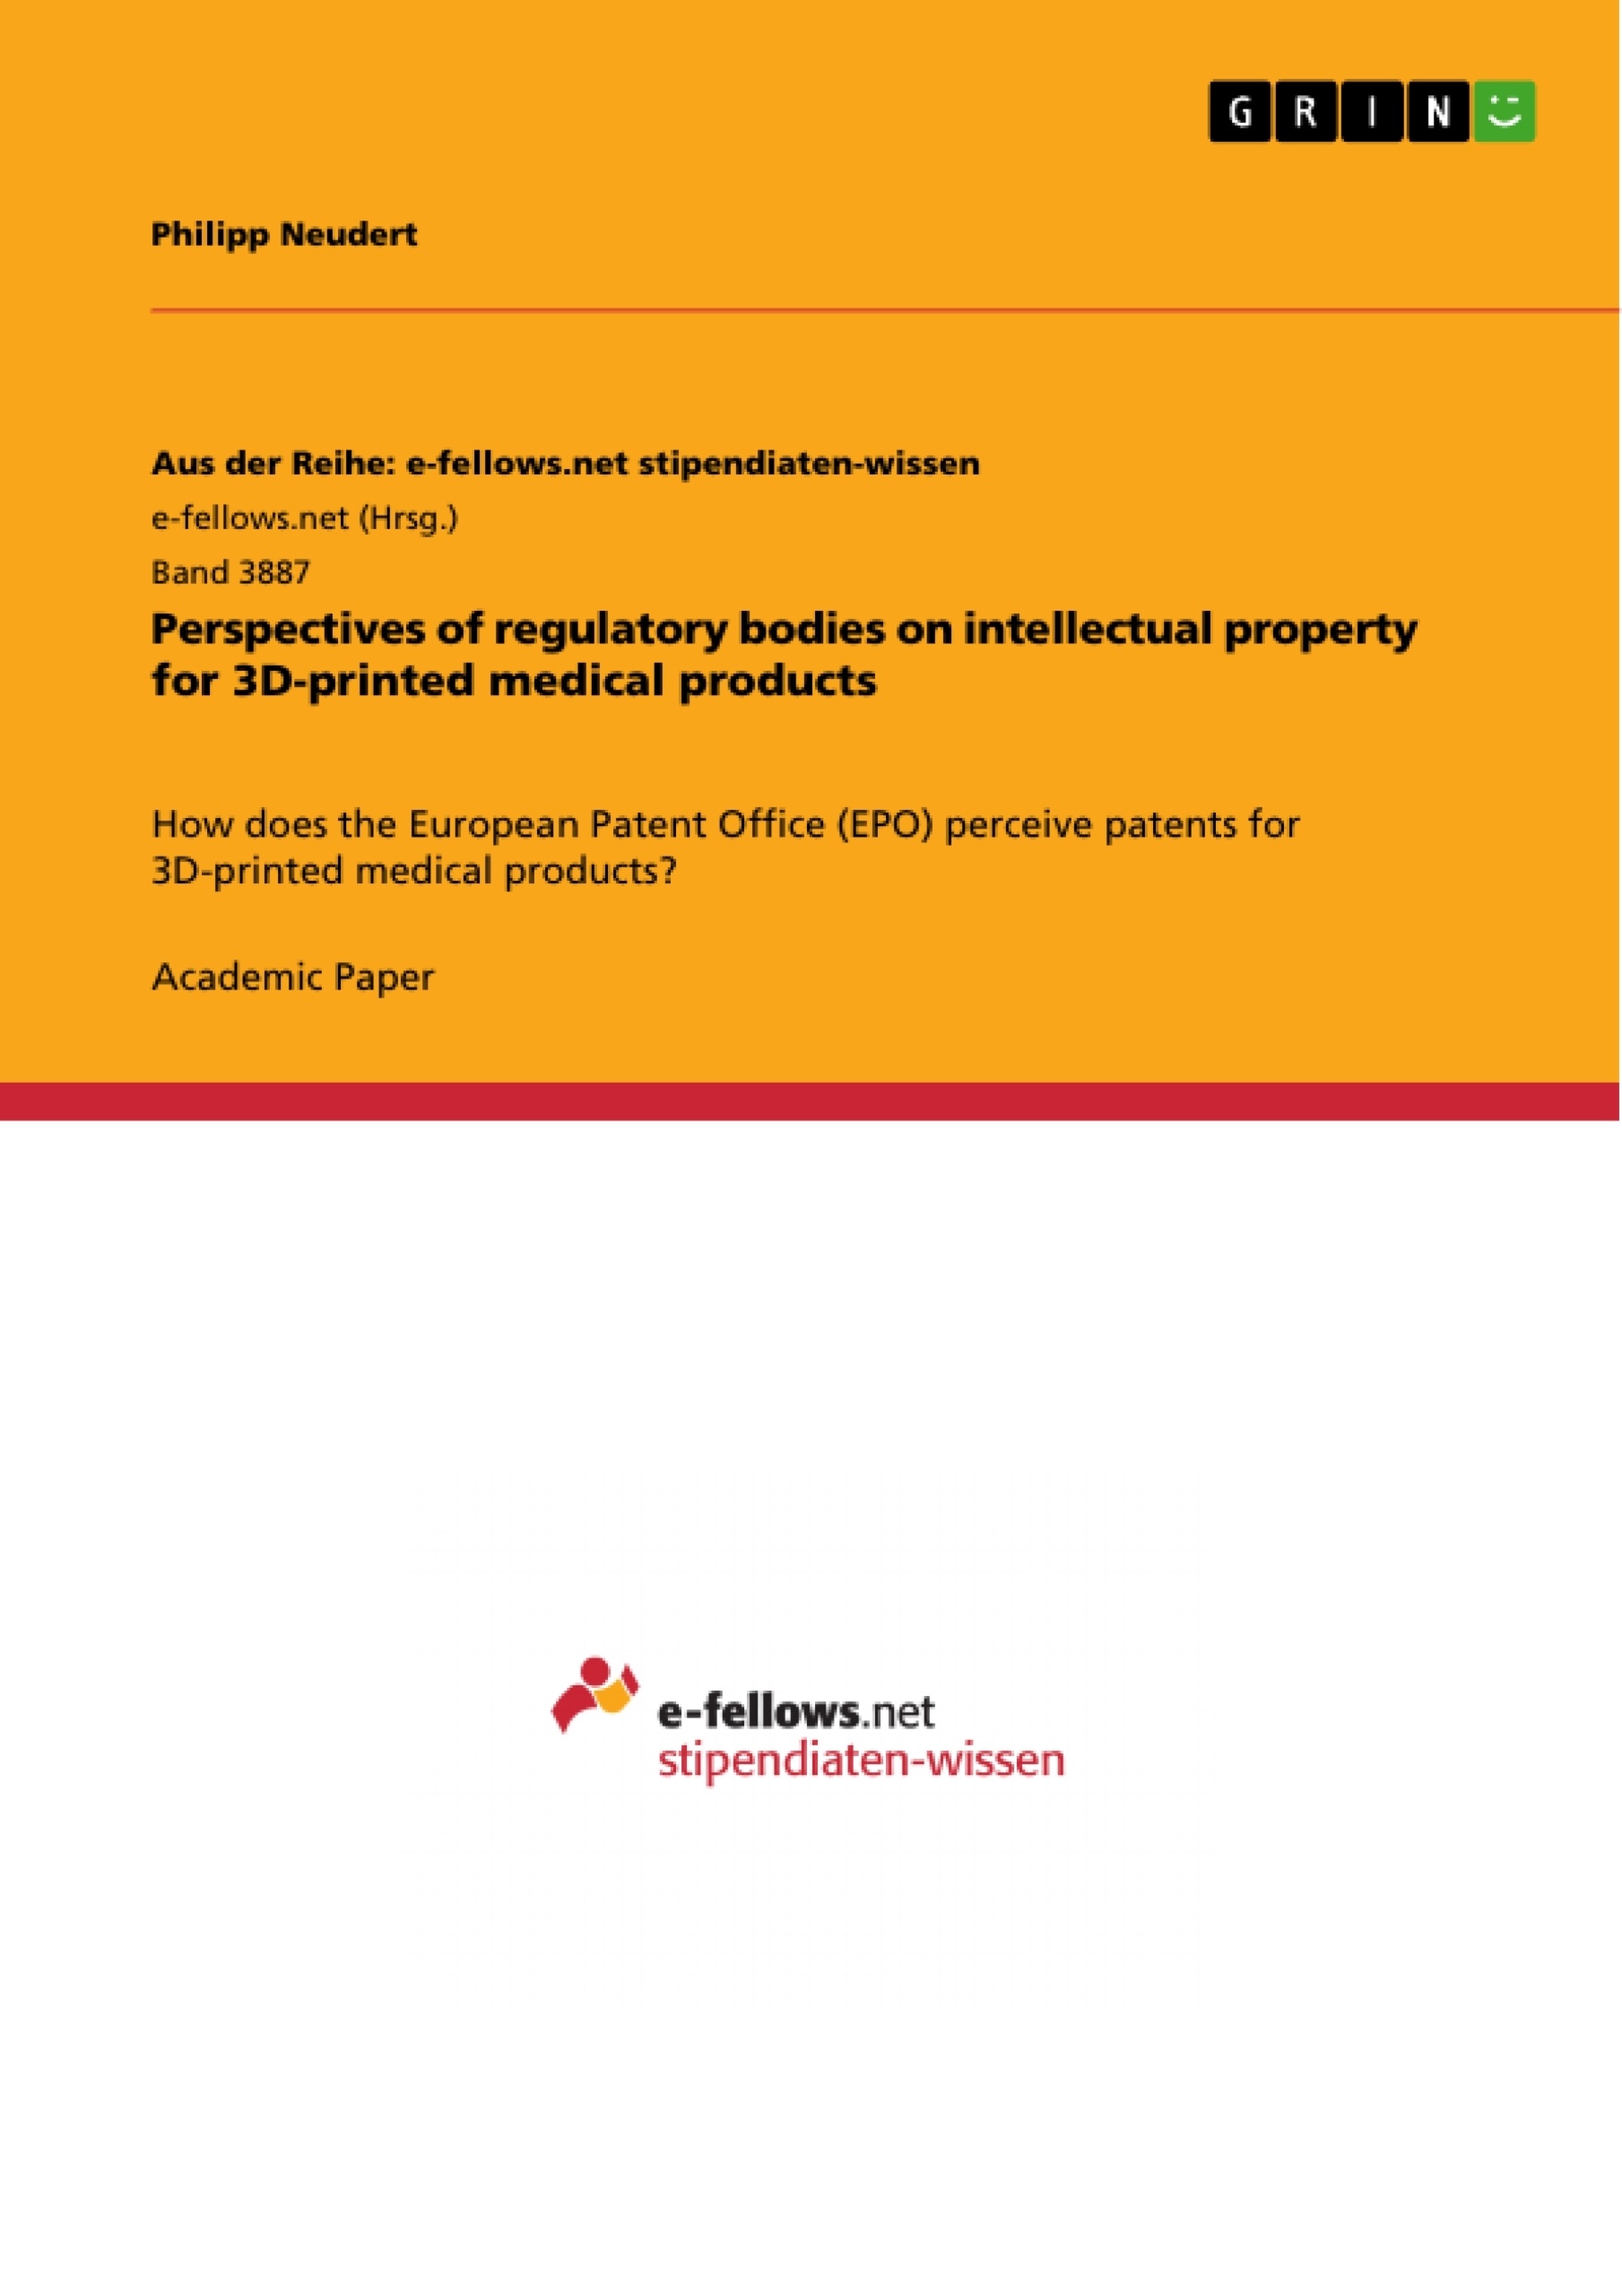 Title: Perspectives of regulatory bodies on intellectual property for 3D-printed medical products